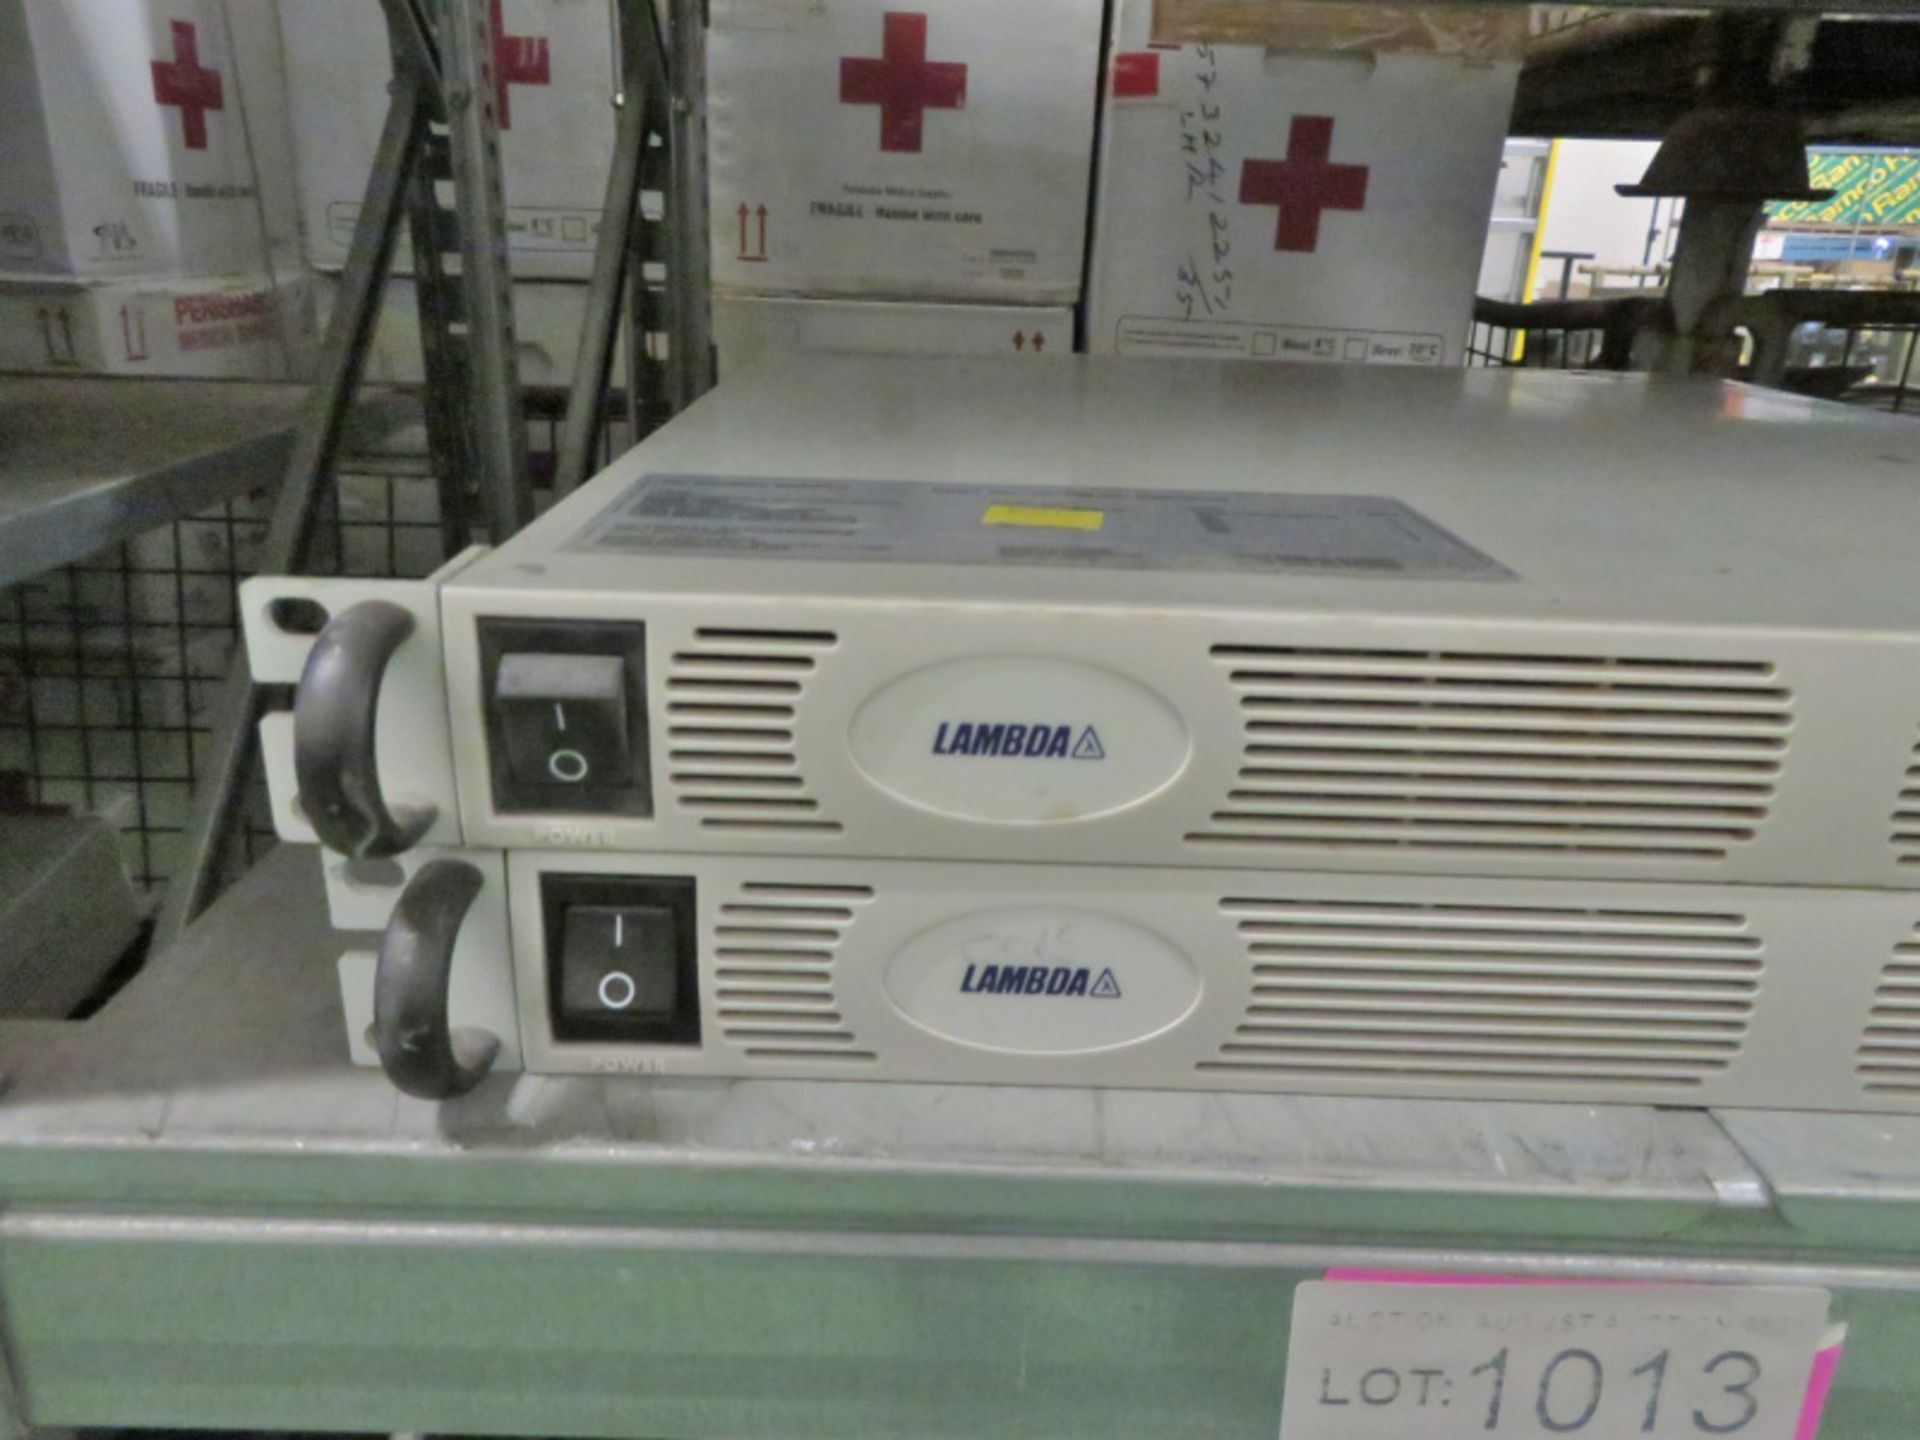 2x Lambda DC Power Supplies Gen 50-30 0-50V 0-30A - missing knobs - Image 3 of 4